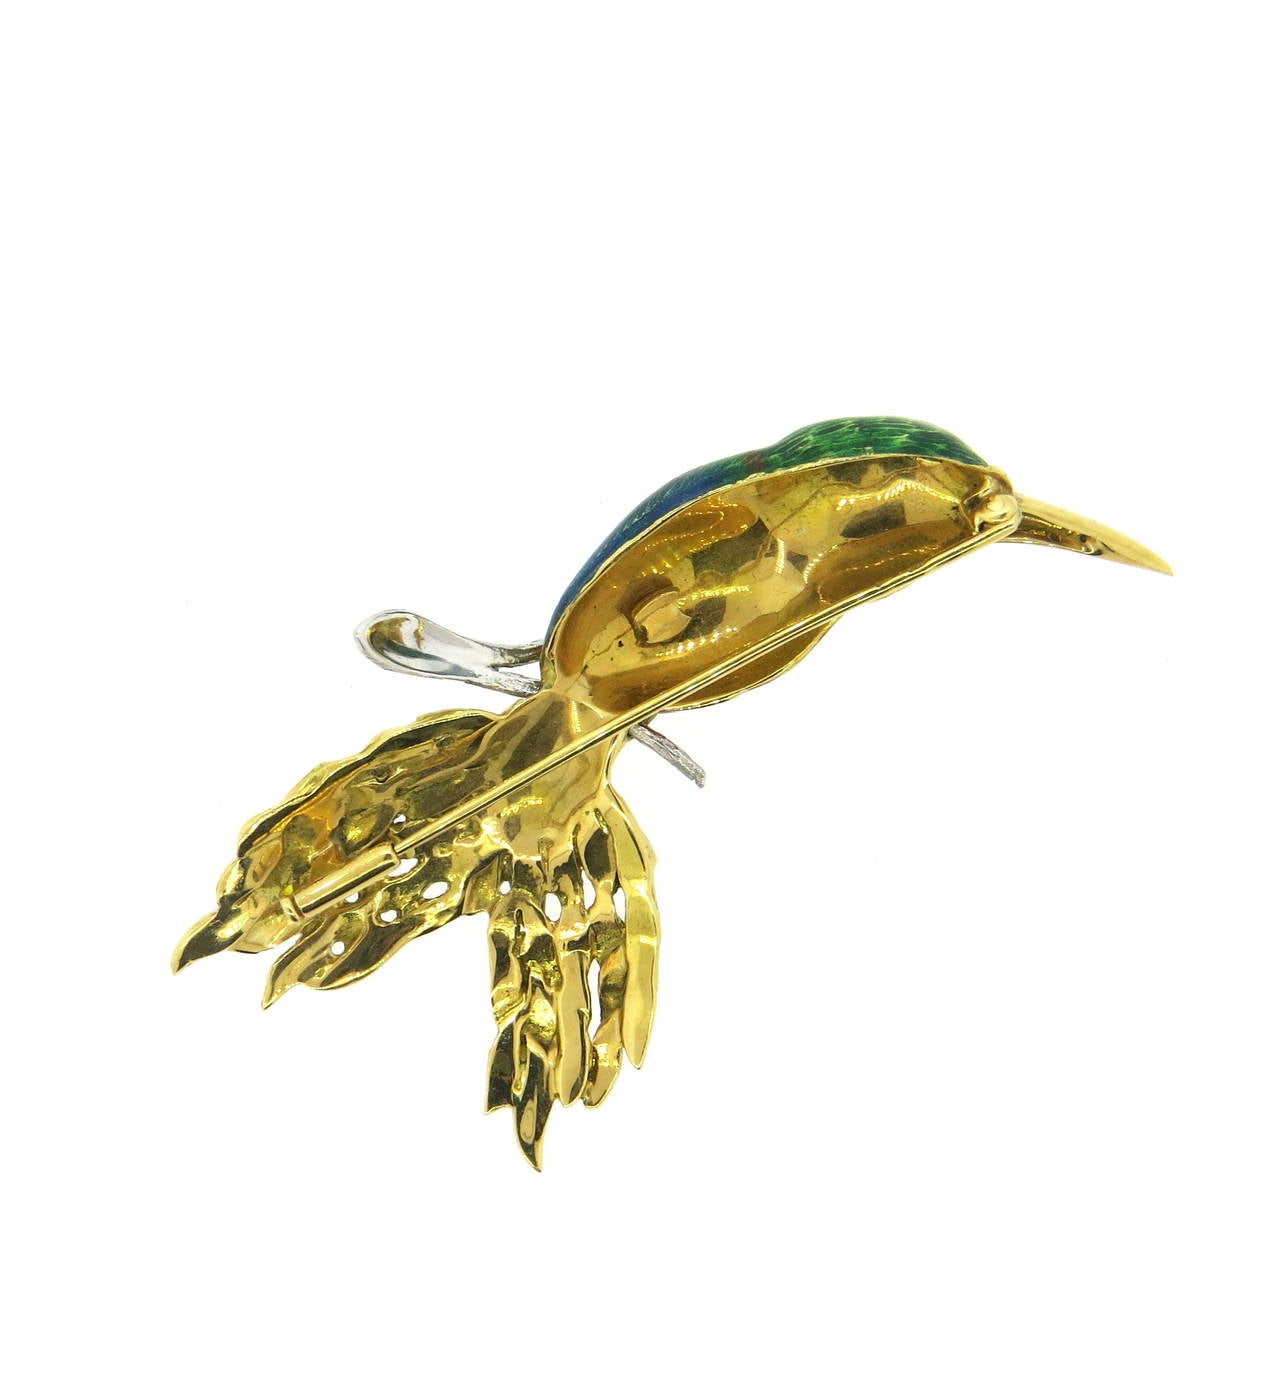 Beautiful 18k gold bird brooch, set in multicolor enamel with blue sapphires. Brooch is 75mm x 40mm. Weight of the piece - 21.3 grams